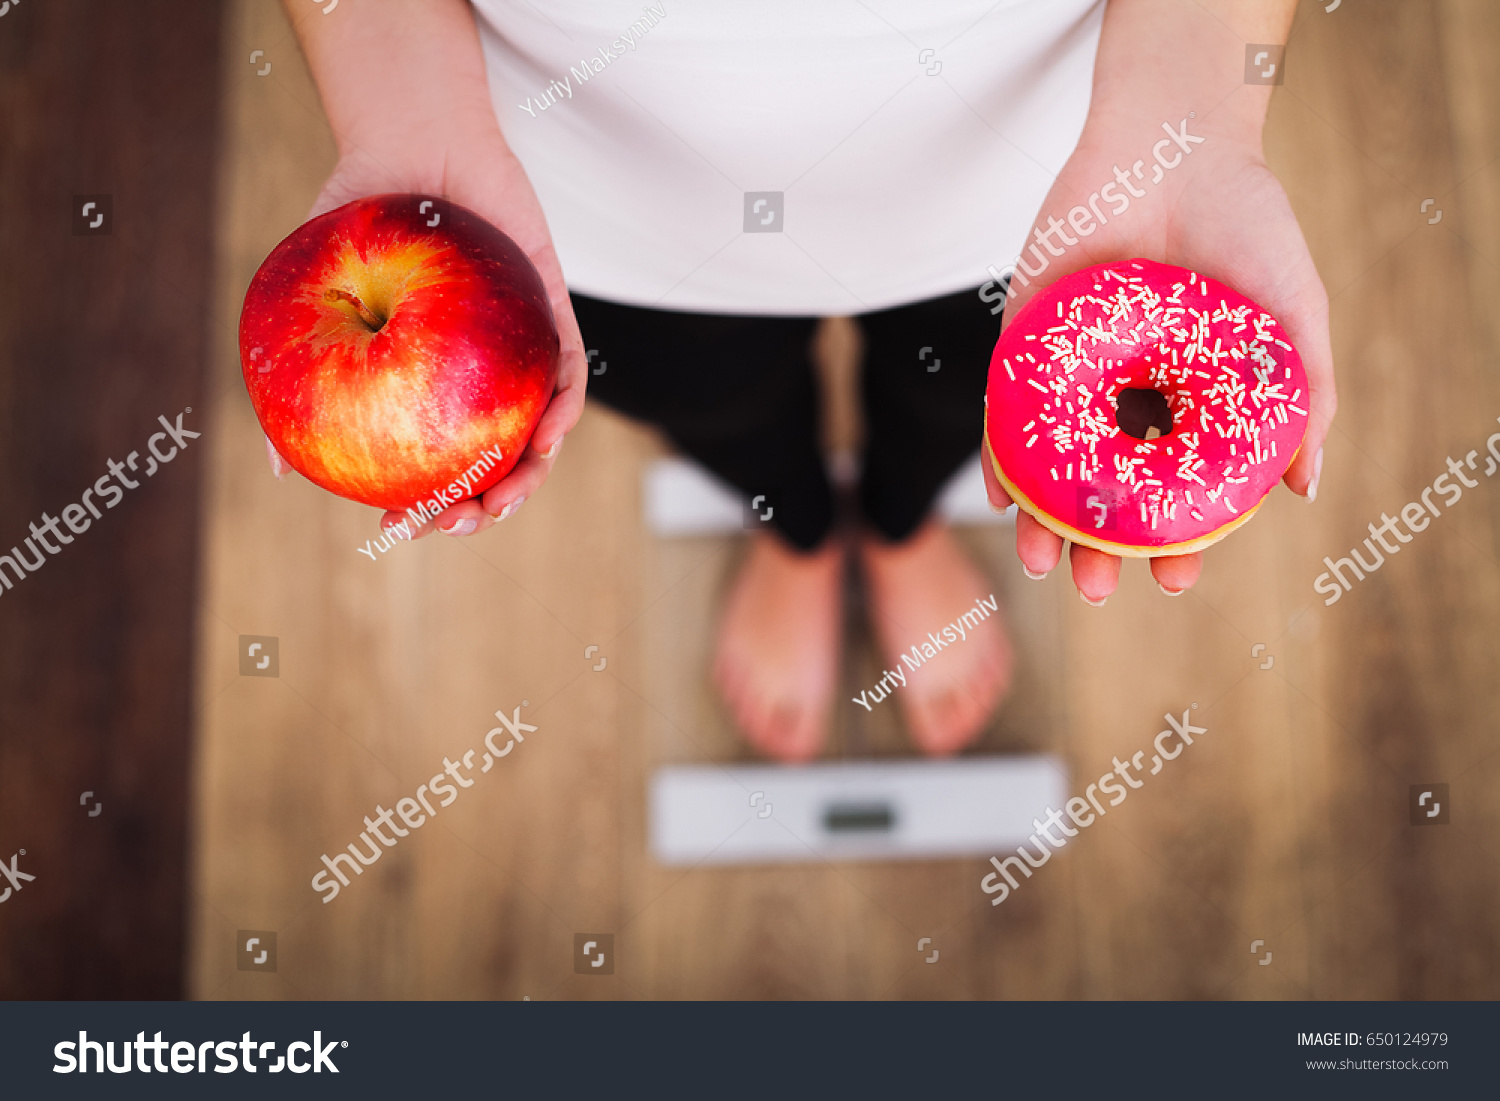 Diet. Woman Measuring Body Weight On Weighing Scale Holding Donut and apple. Sweets Are Unhealthy Junk Food. Dieting, Healthy Eating, Lifestyle. Weight Loss. Obesity. Top View #650124979